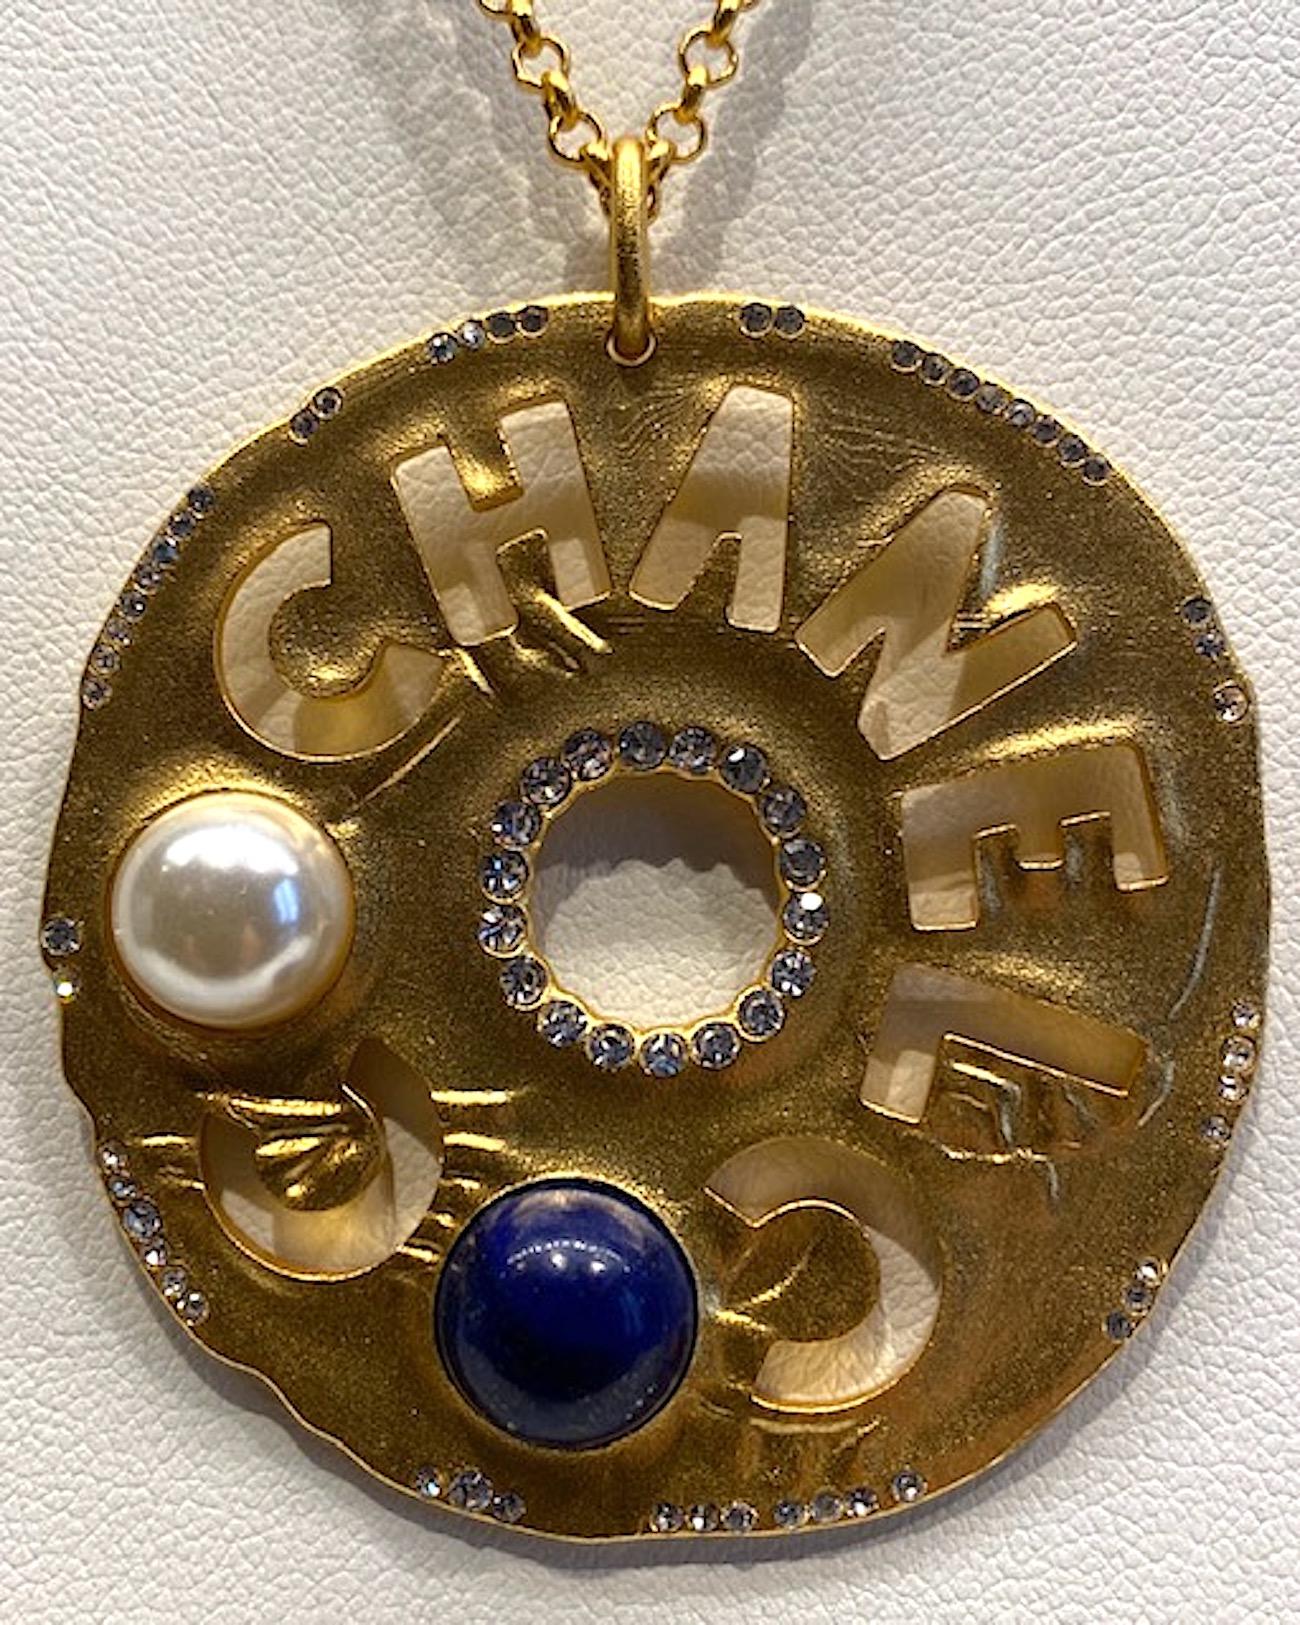 Chanel Cut Out Disk Pendant Necklace, 2019 Cruise Collection 2